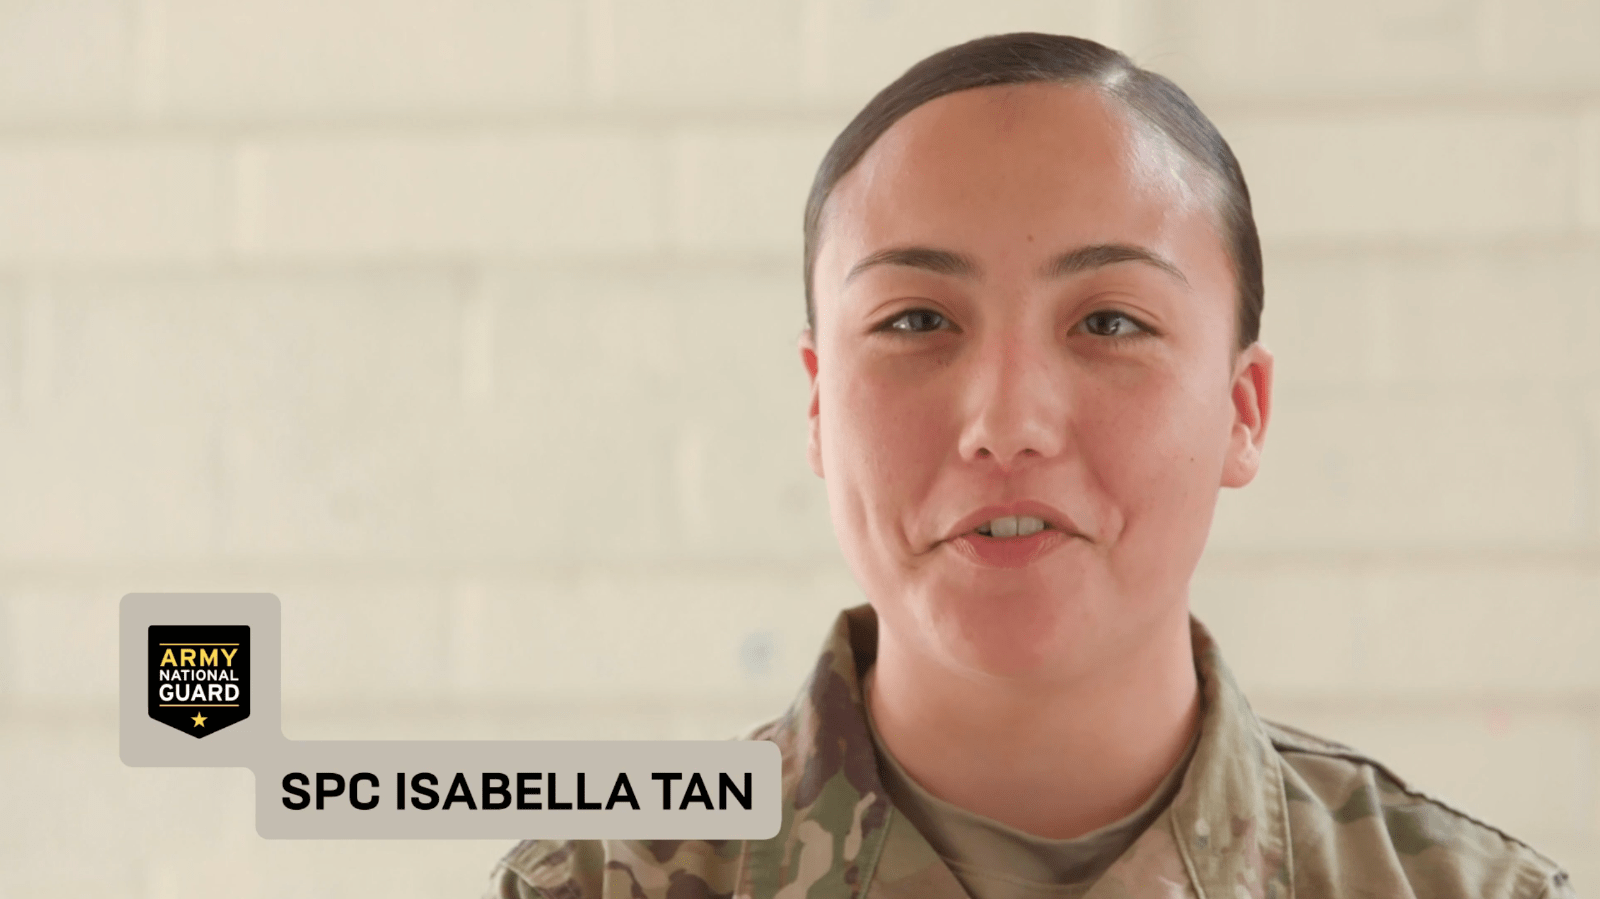 Behind the scenes of an Army National Guard photo shoot with SPC Isabella Tan